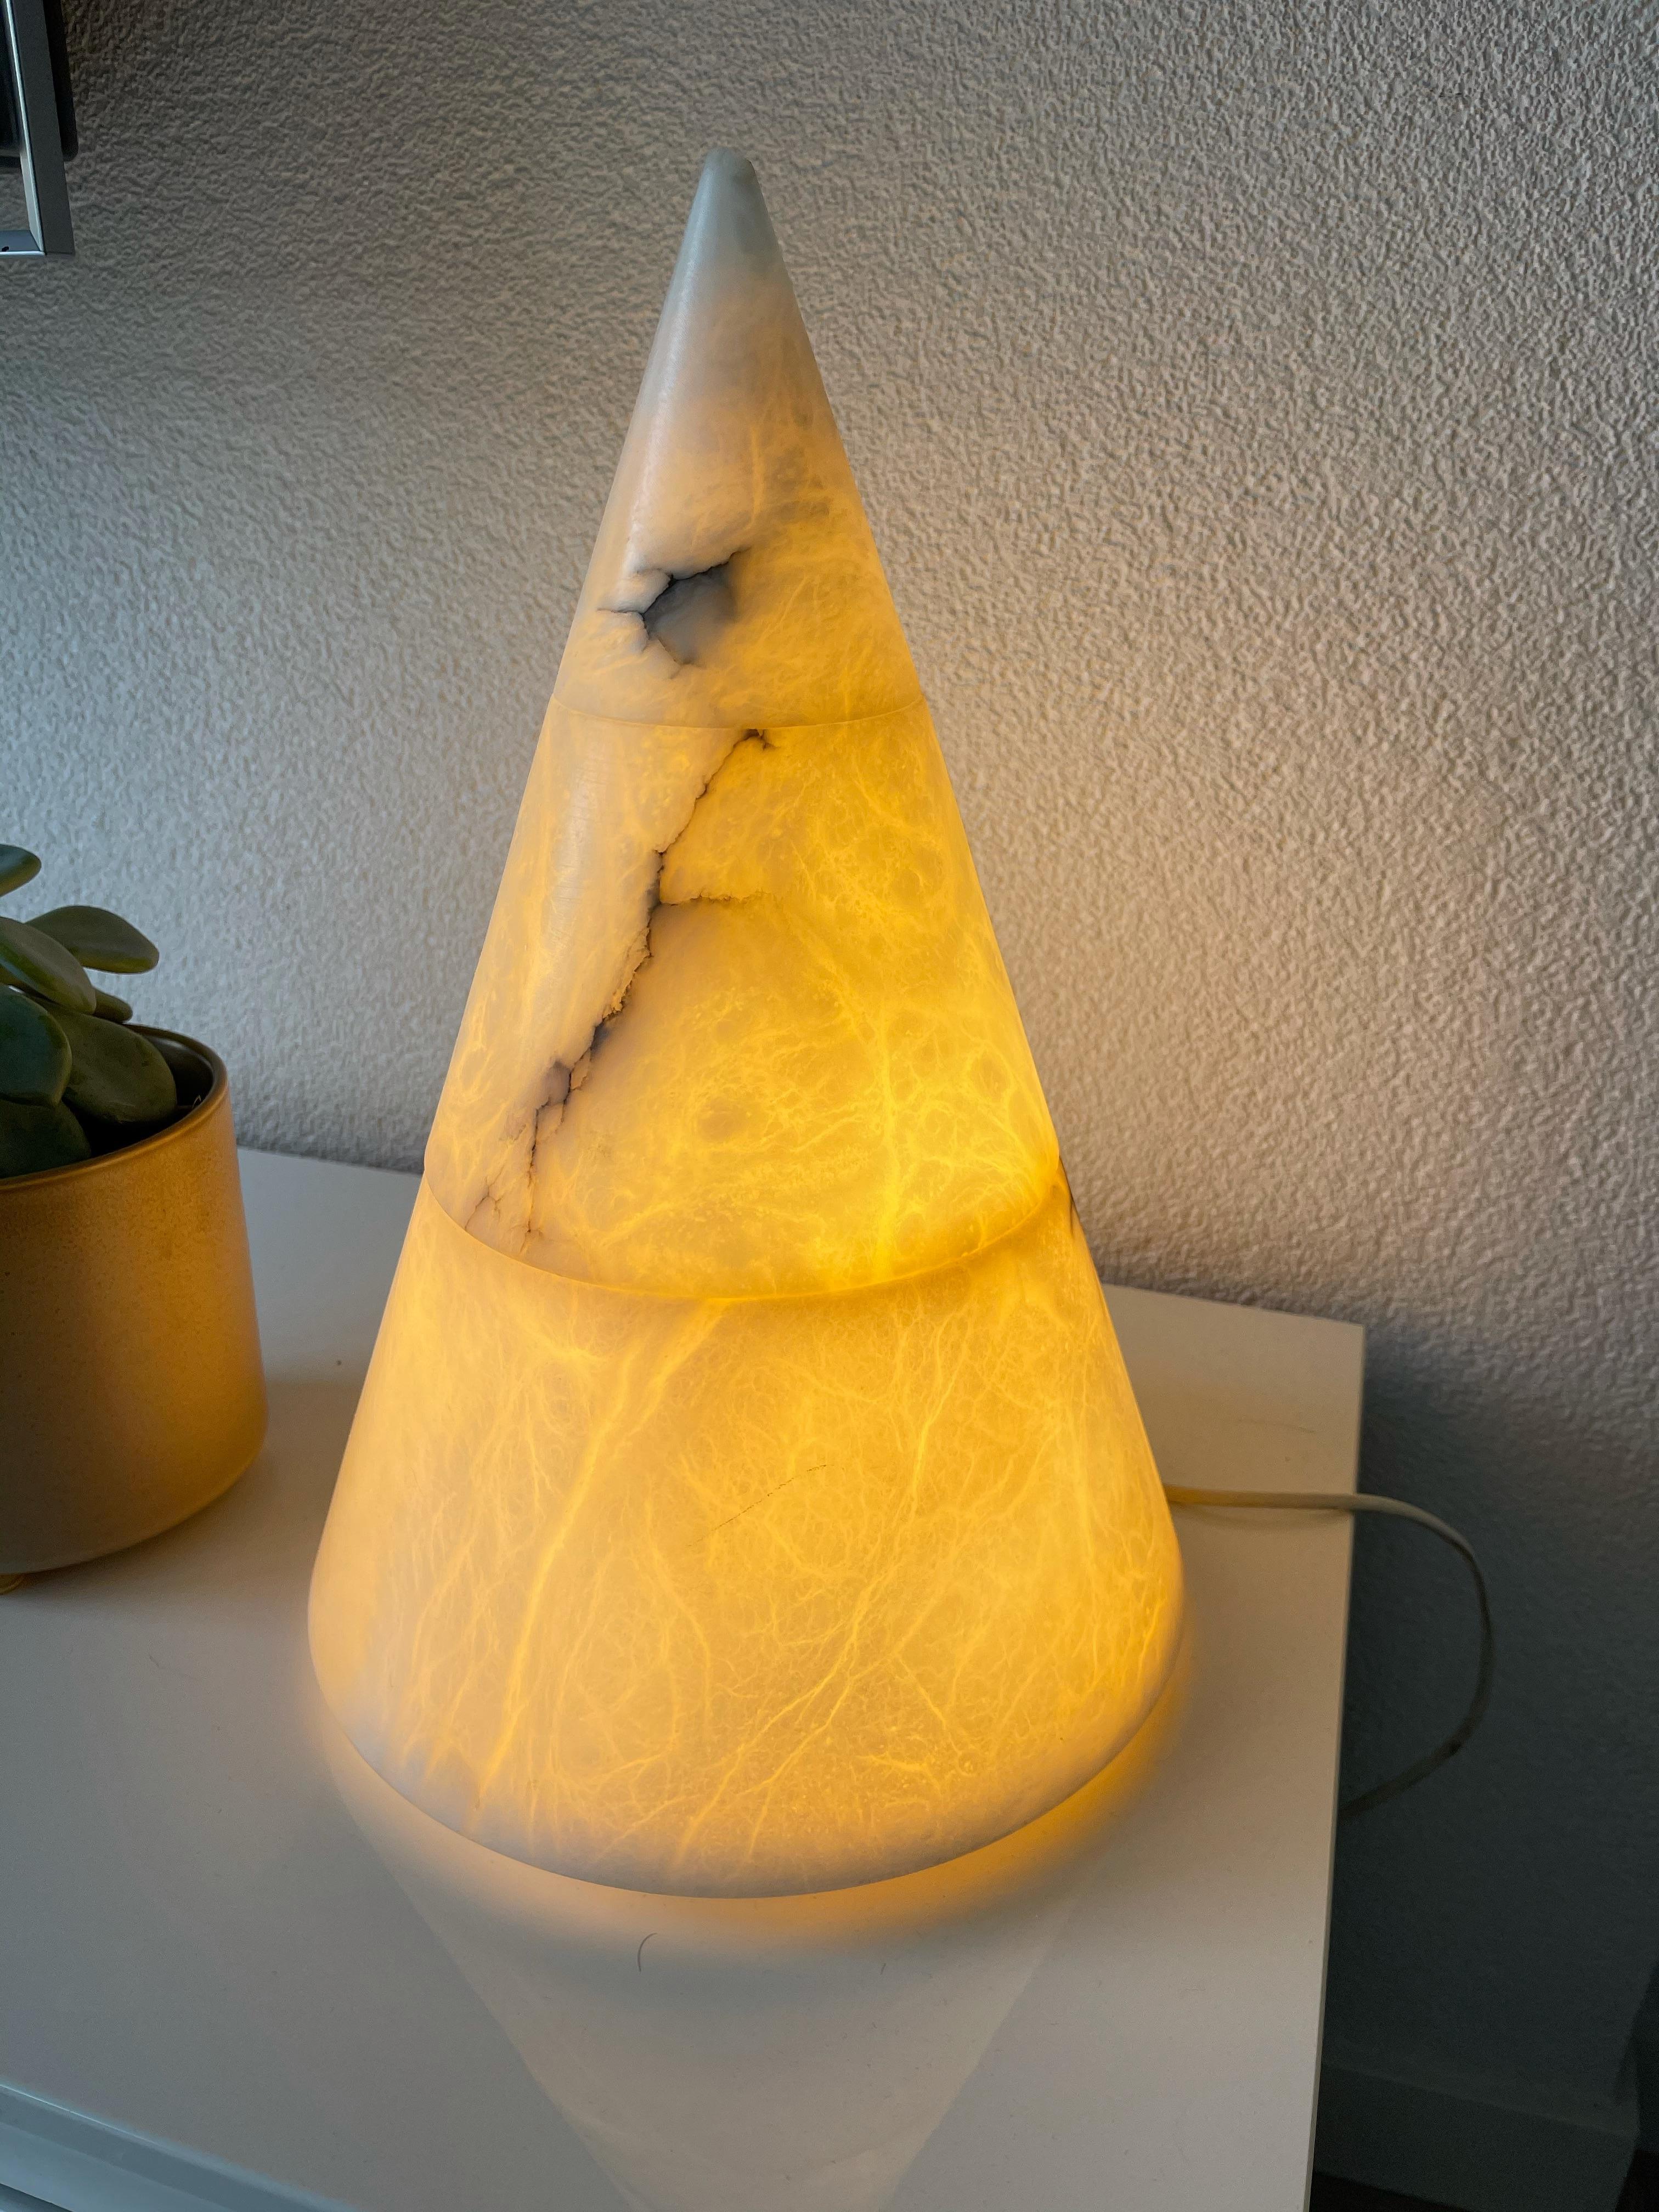 European Another Mid-Century Modern Alabaster Pyramid Design and Conical Shape Table Lamp For Sale